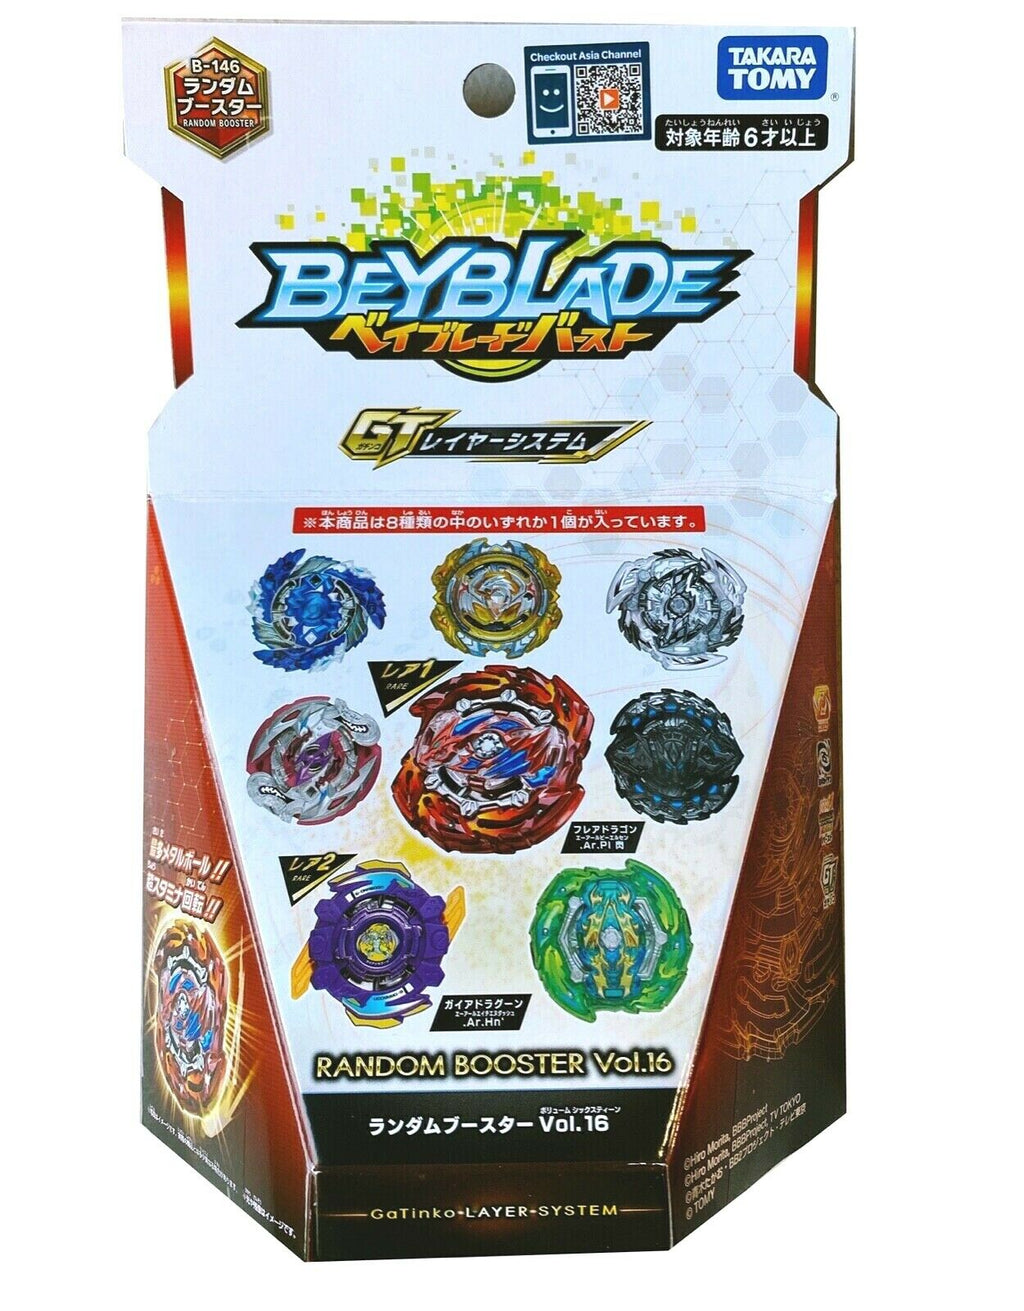 Beyblade Burst Guide for parents and beginners - Curious and Geeks